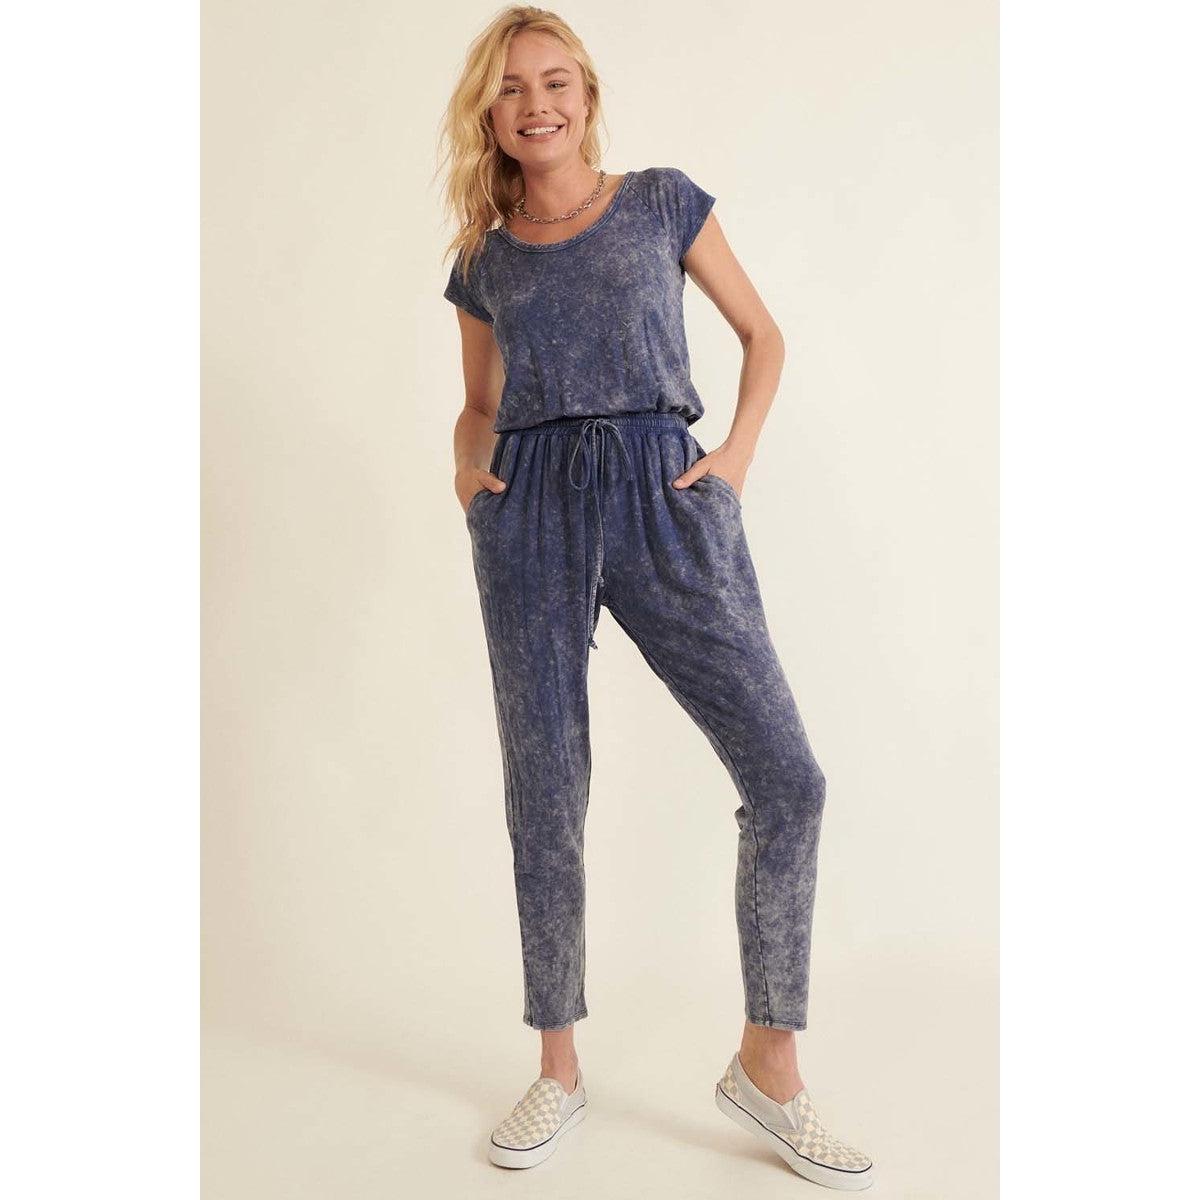 Mineral Washed Finish Knit Jumpsuit-NXTLVLNYC